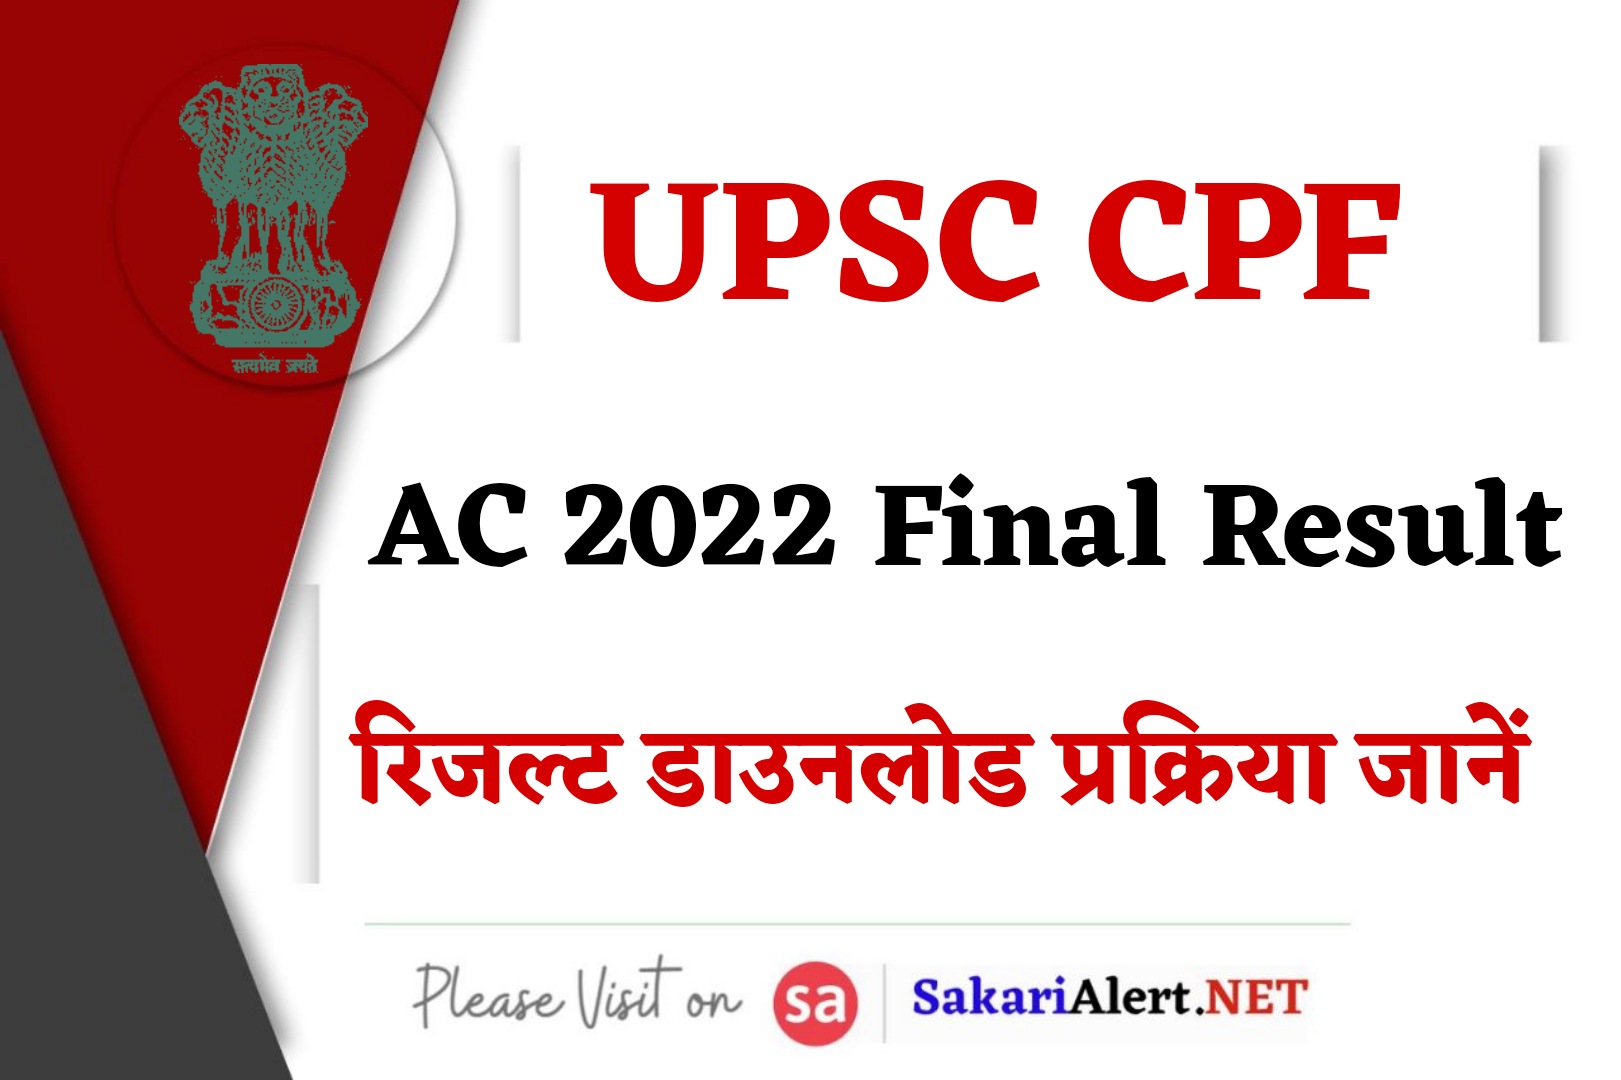 UPSC CPF AC 2022 Final Result with Marks